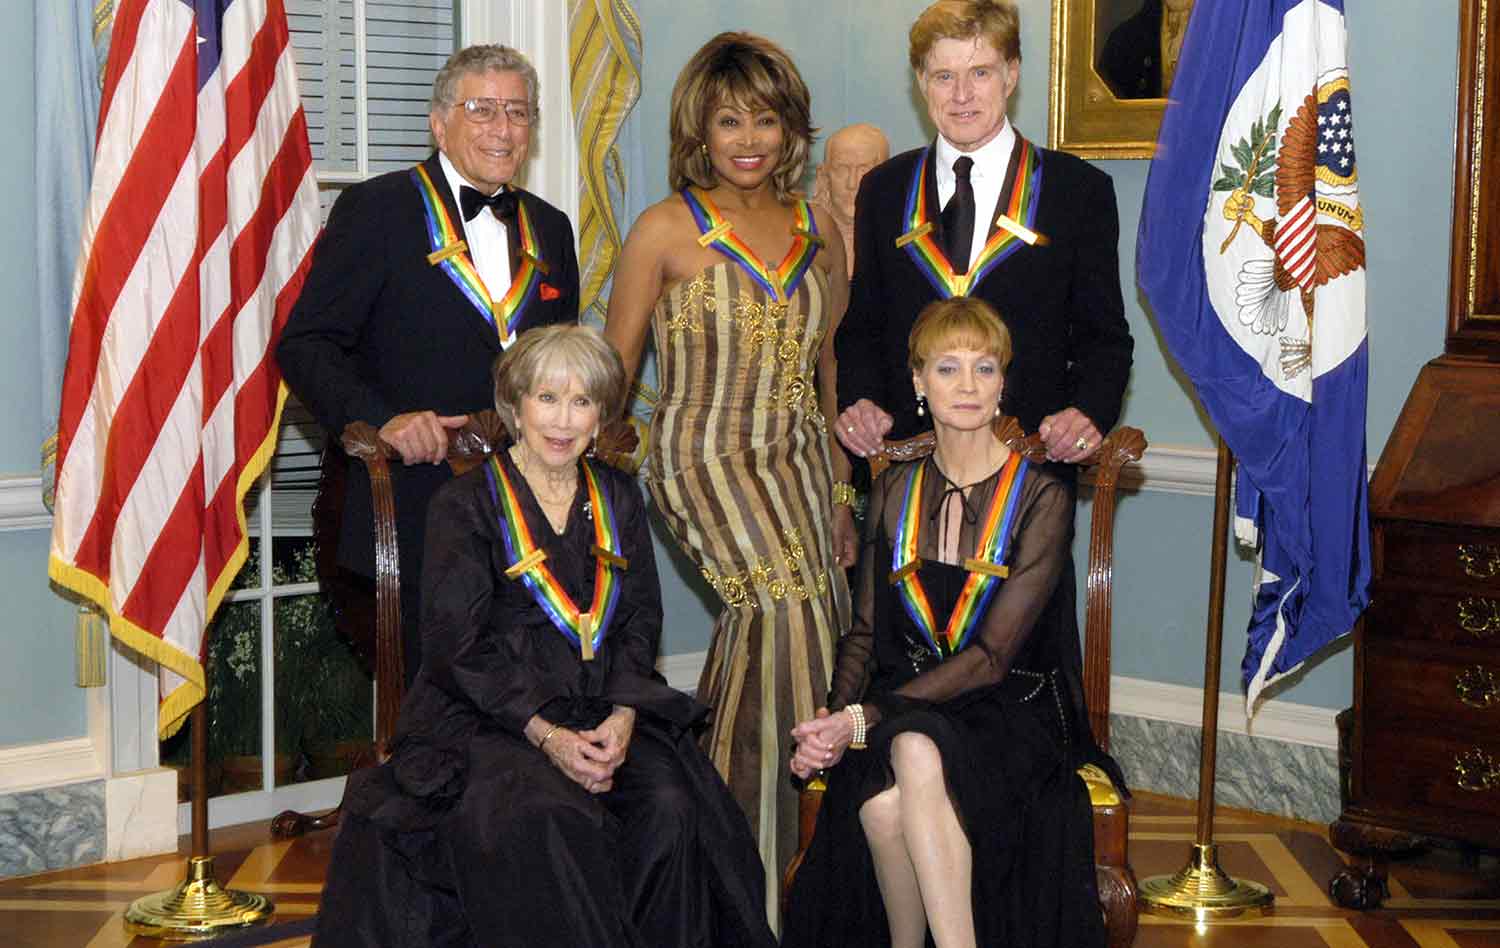 Julie Harris and Suzanne Farrell are seated in front of Tina Turner, who stands between Tony Bennett and Robert Redford.